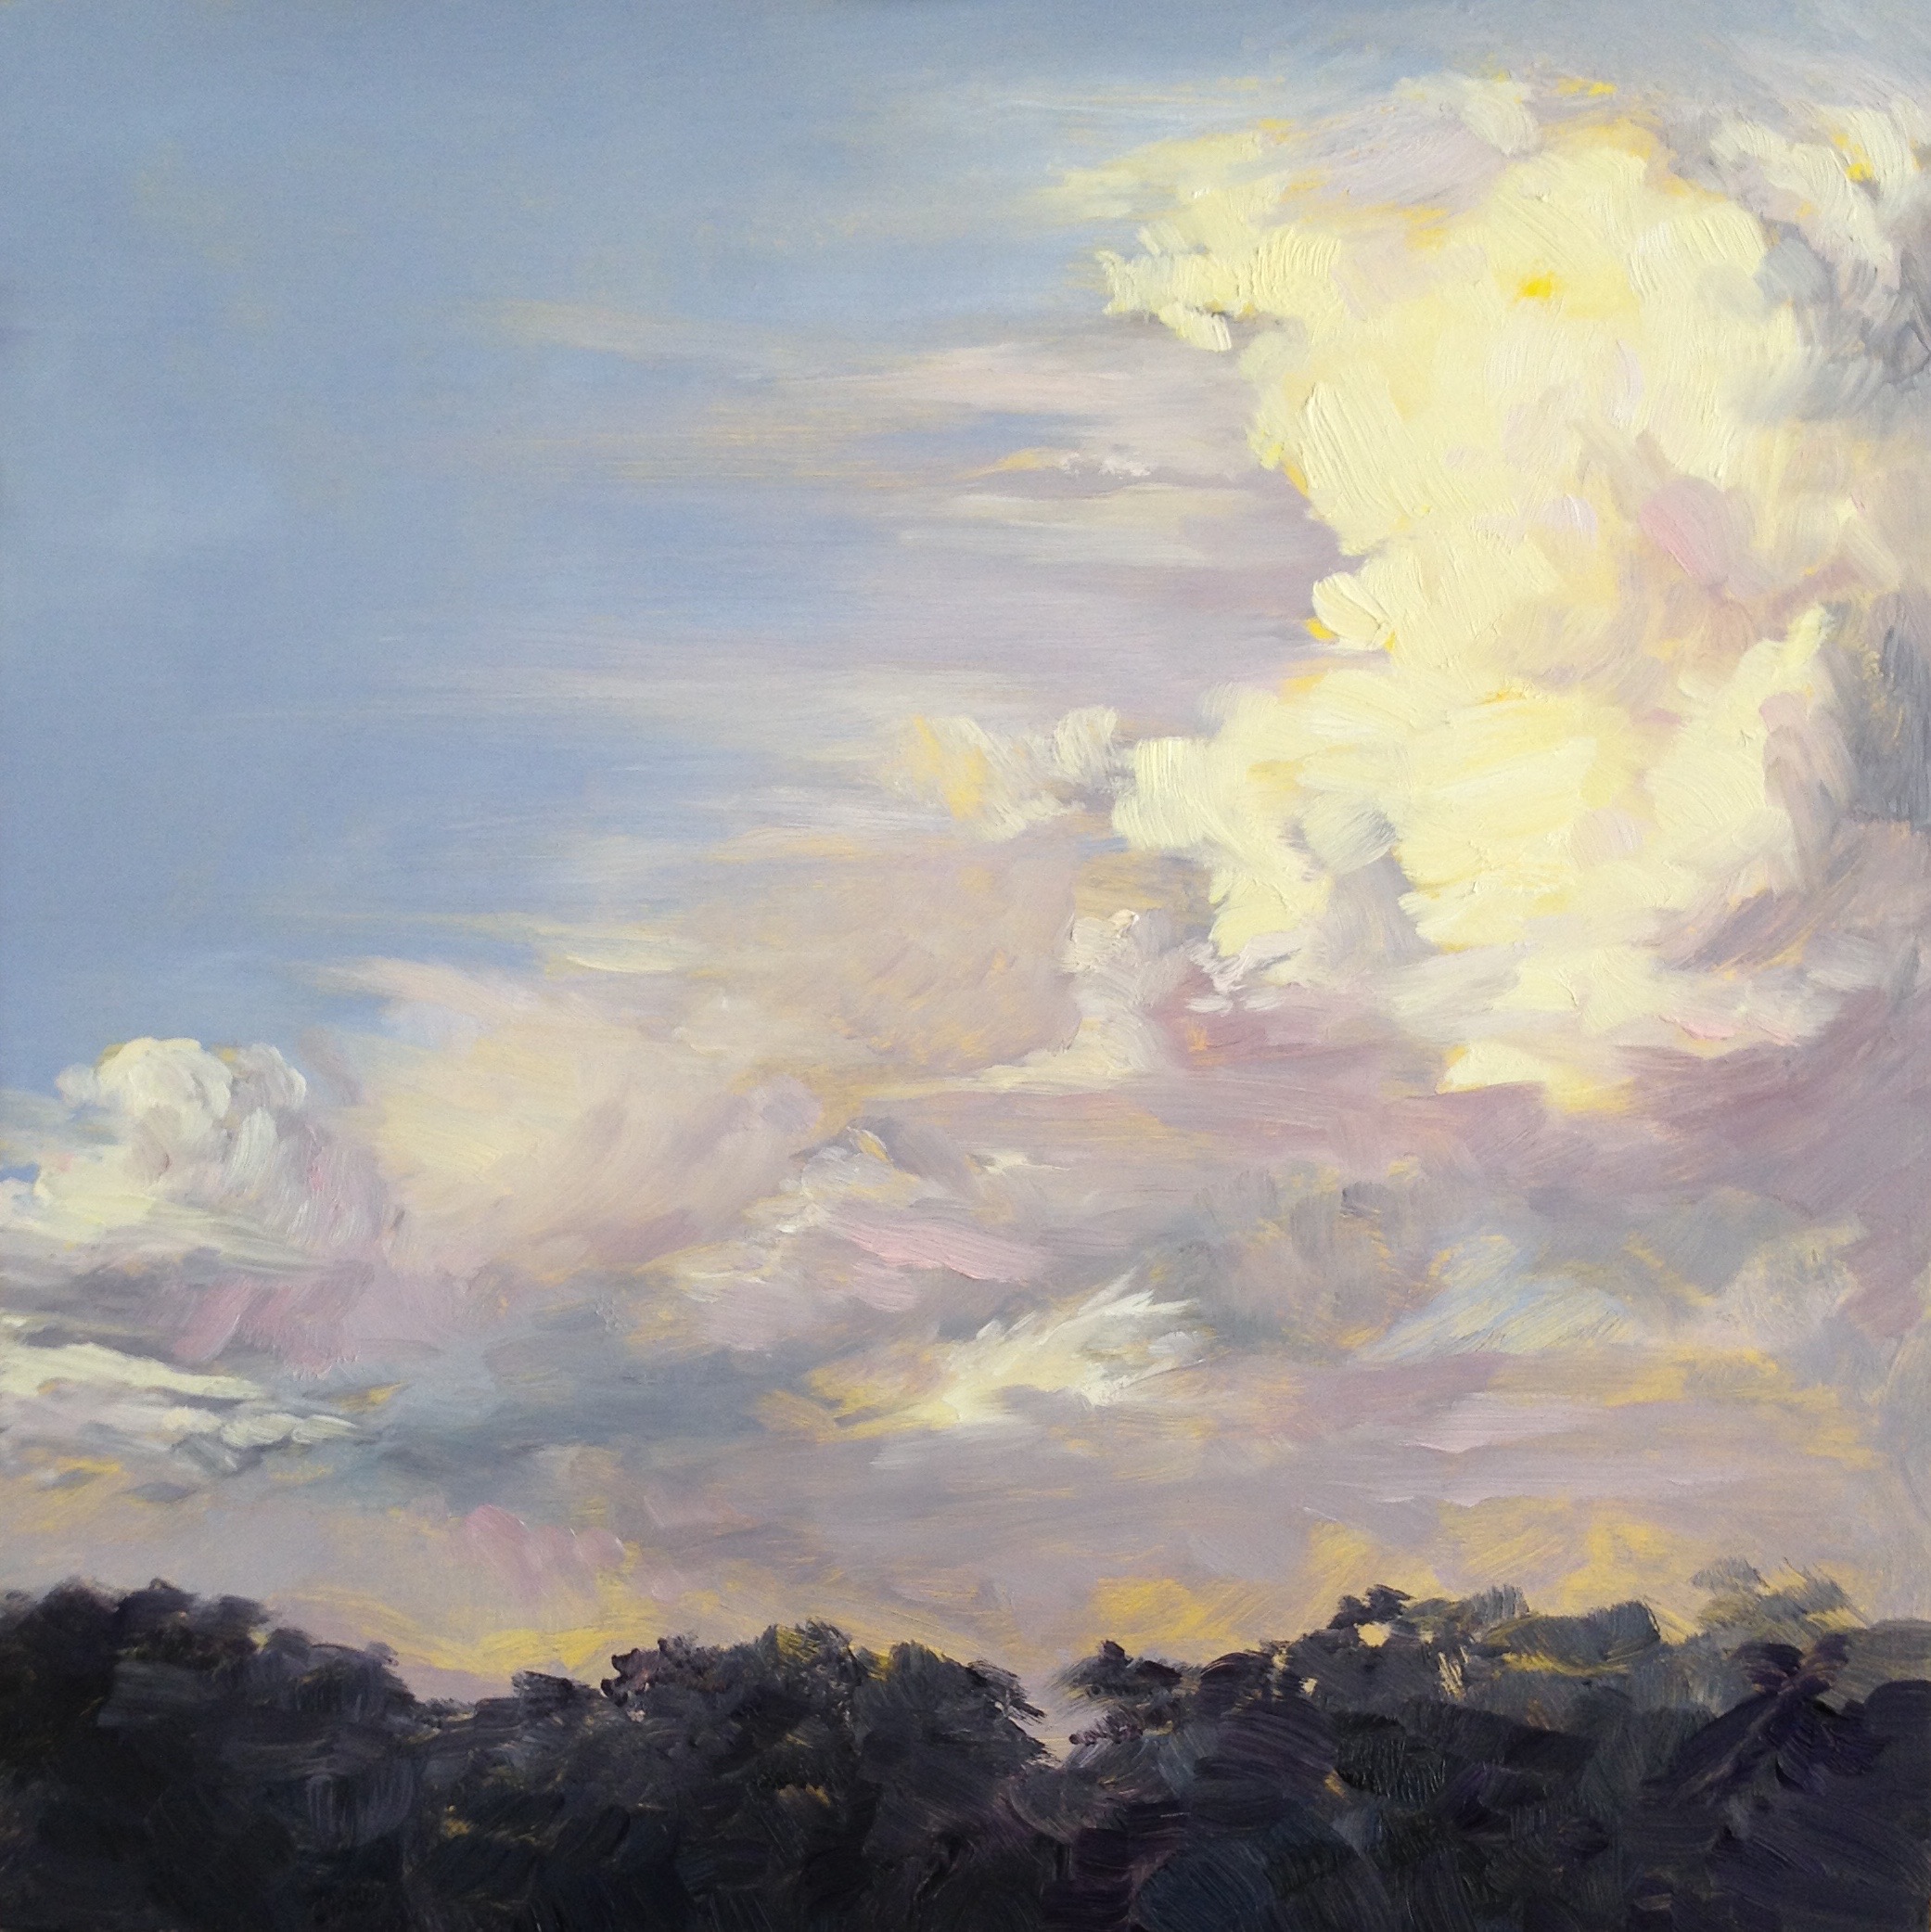 Late Afternoon, Oil on board, 32x32cm, Sold